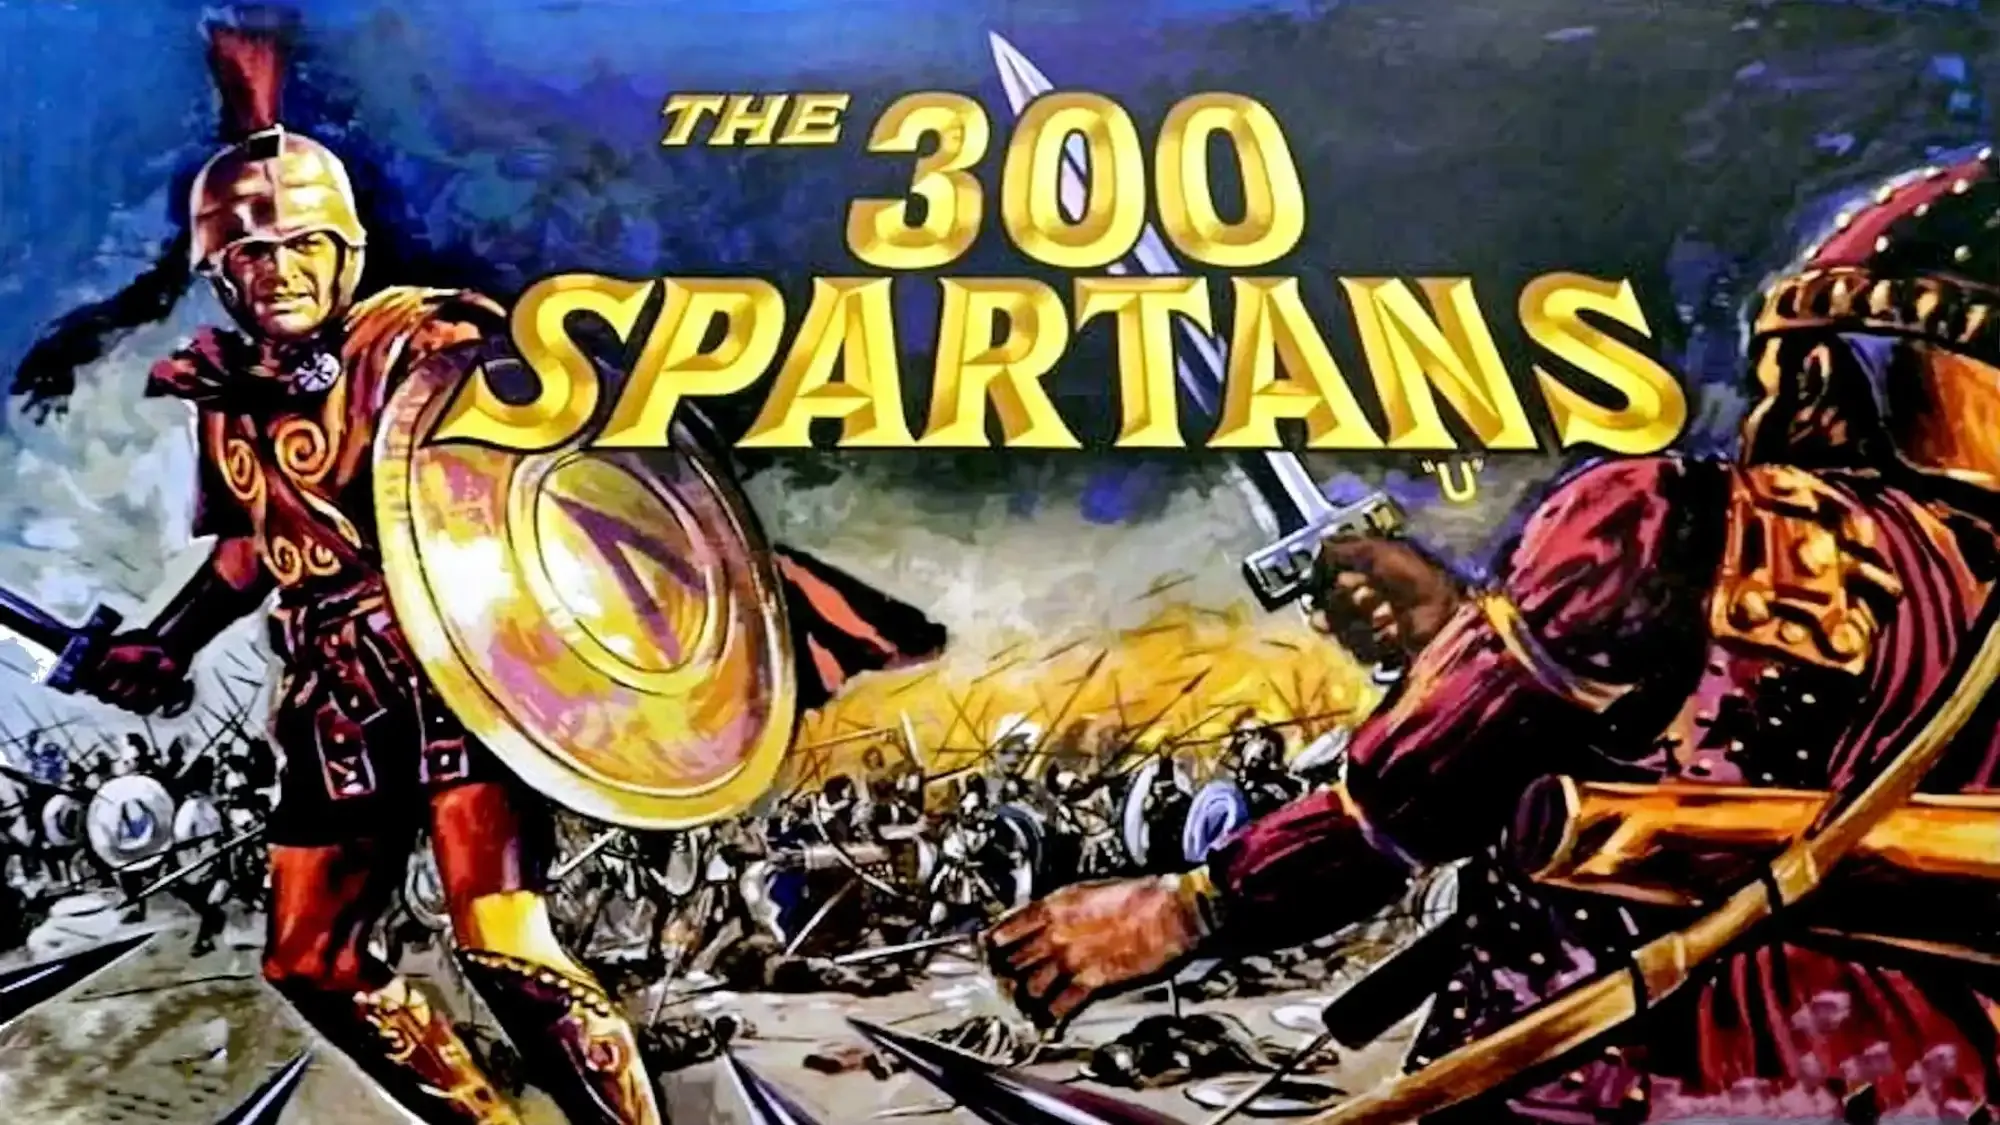 The 300 Spartans movie review